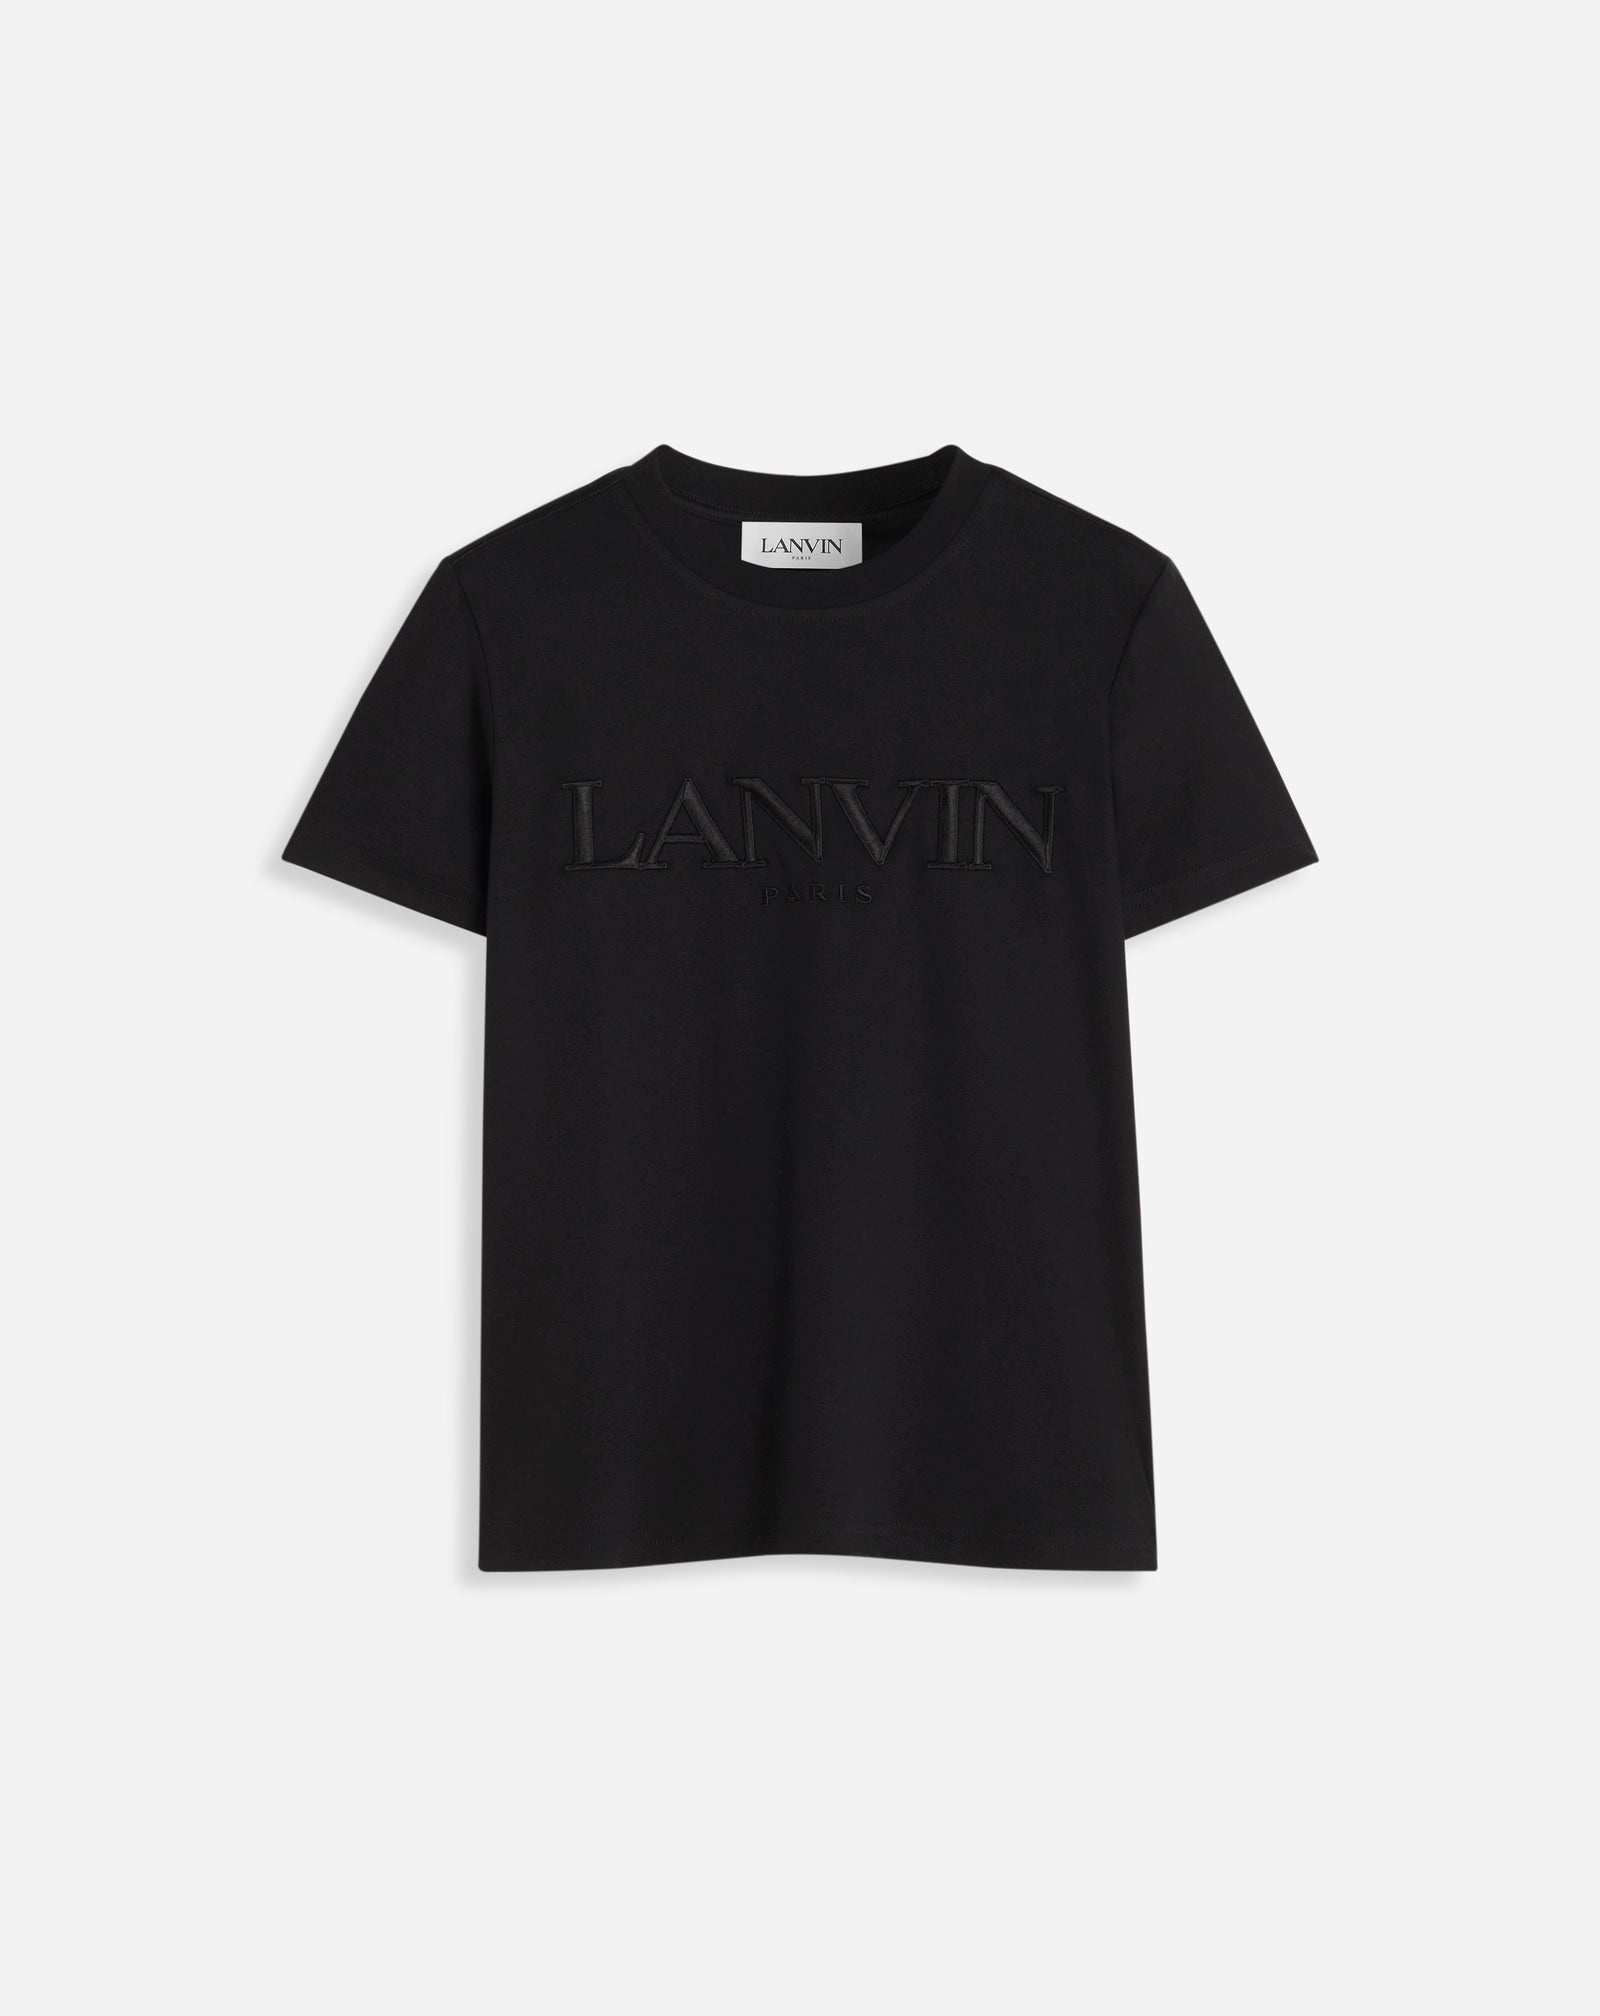 CLASSIC FIT LANVIN EMBROIDERED T-SHIRT - 1